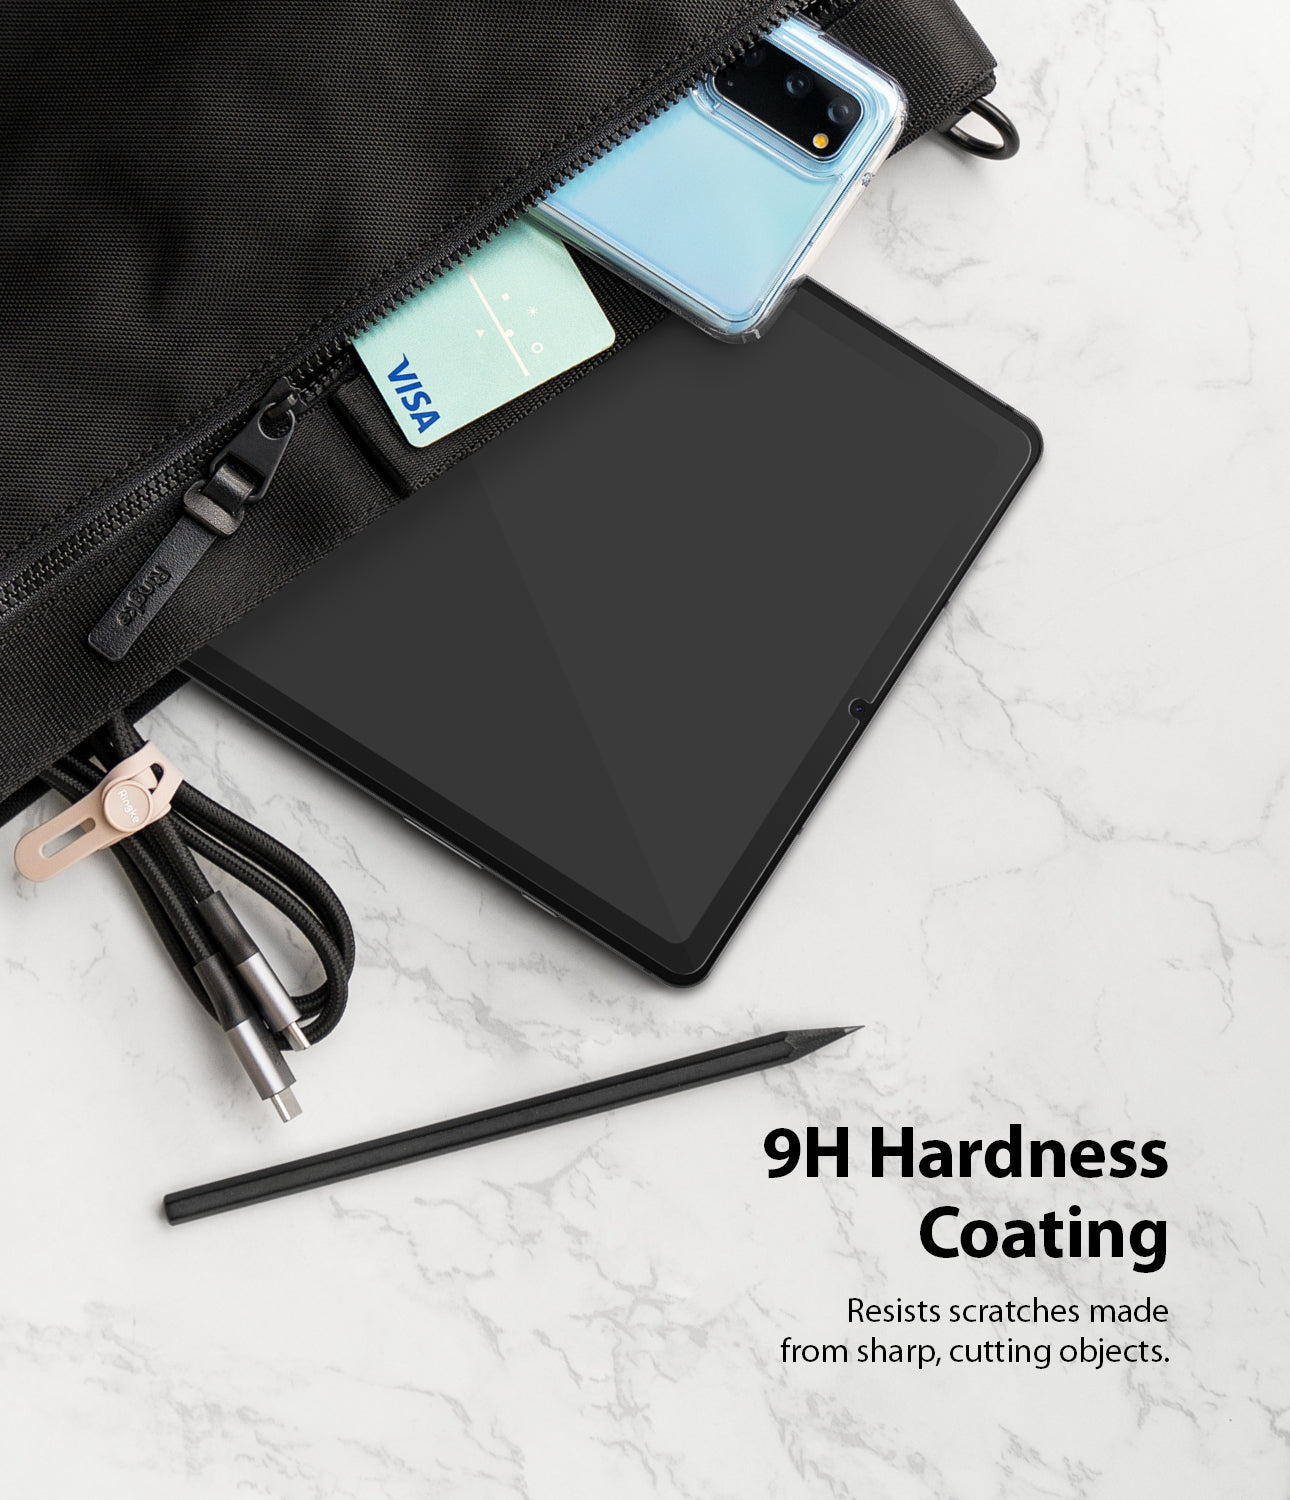 9h hardness coating to resist scratches from sharp, cutting objects